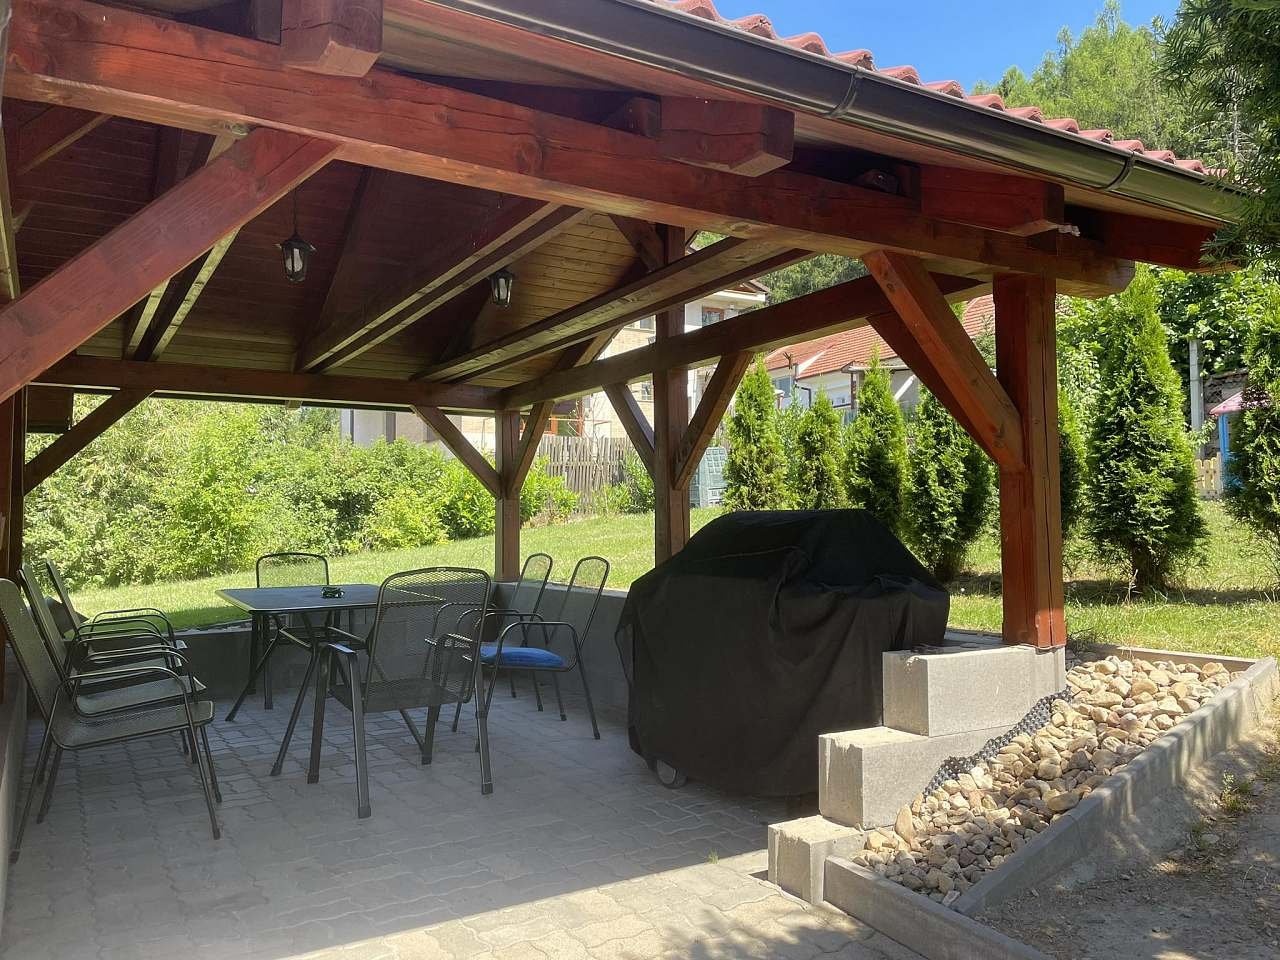 Pergola with gas grill